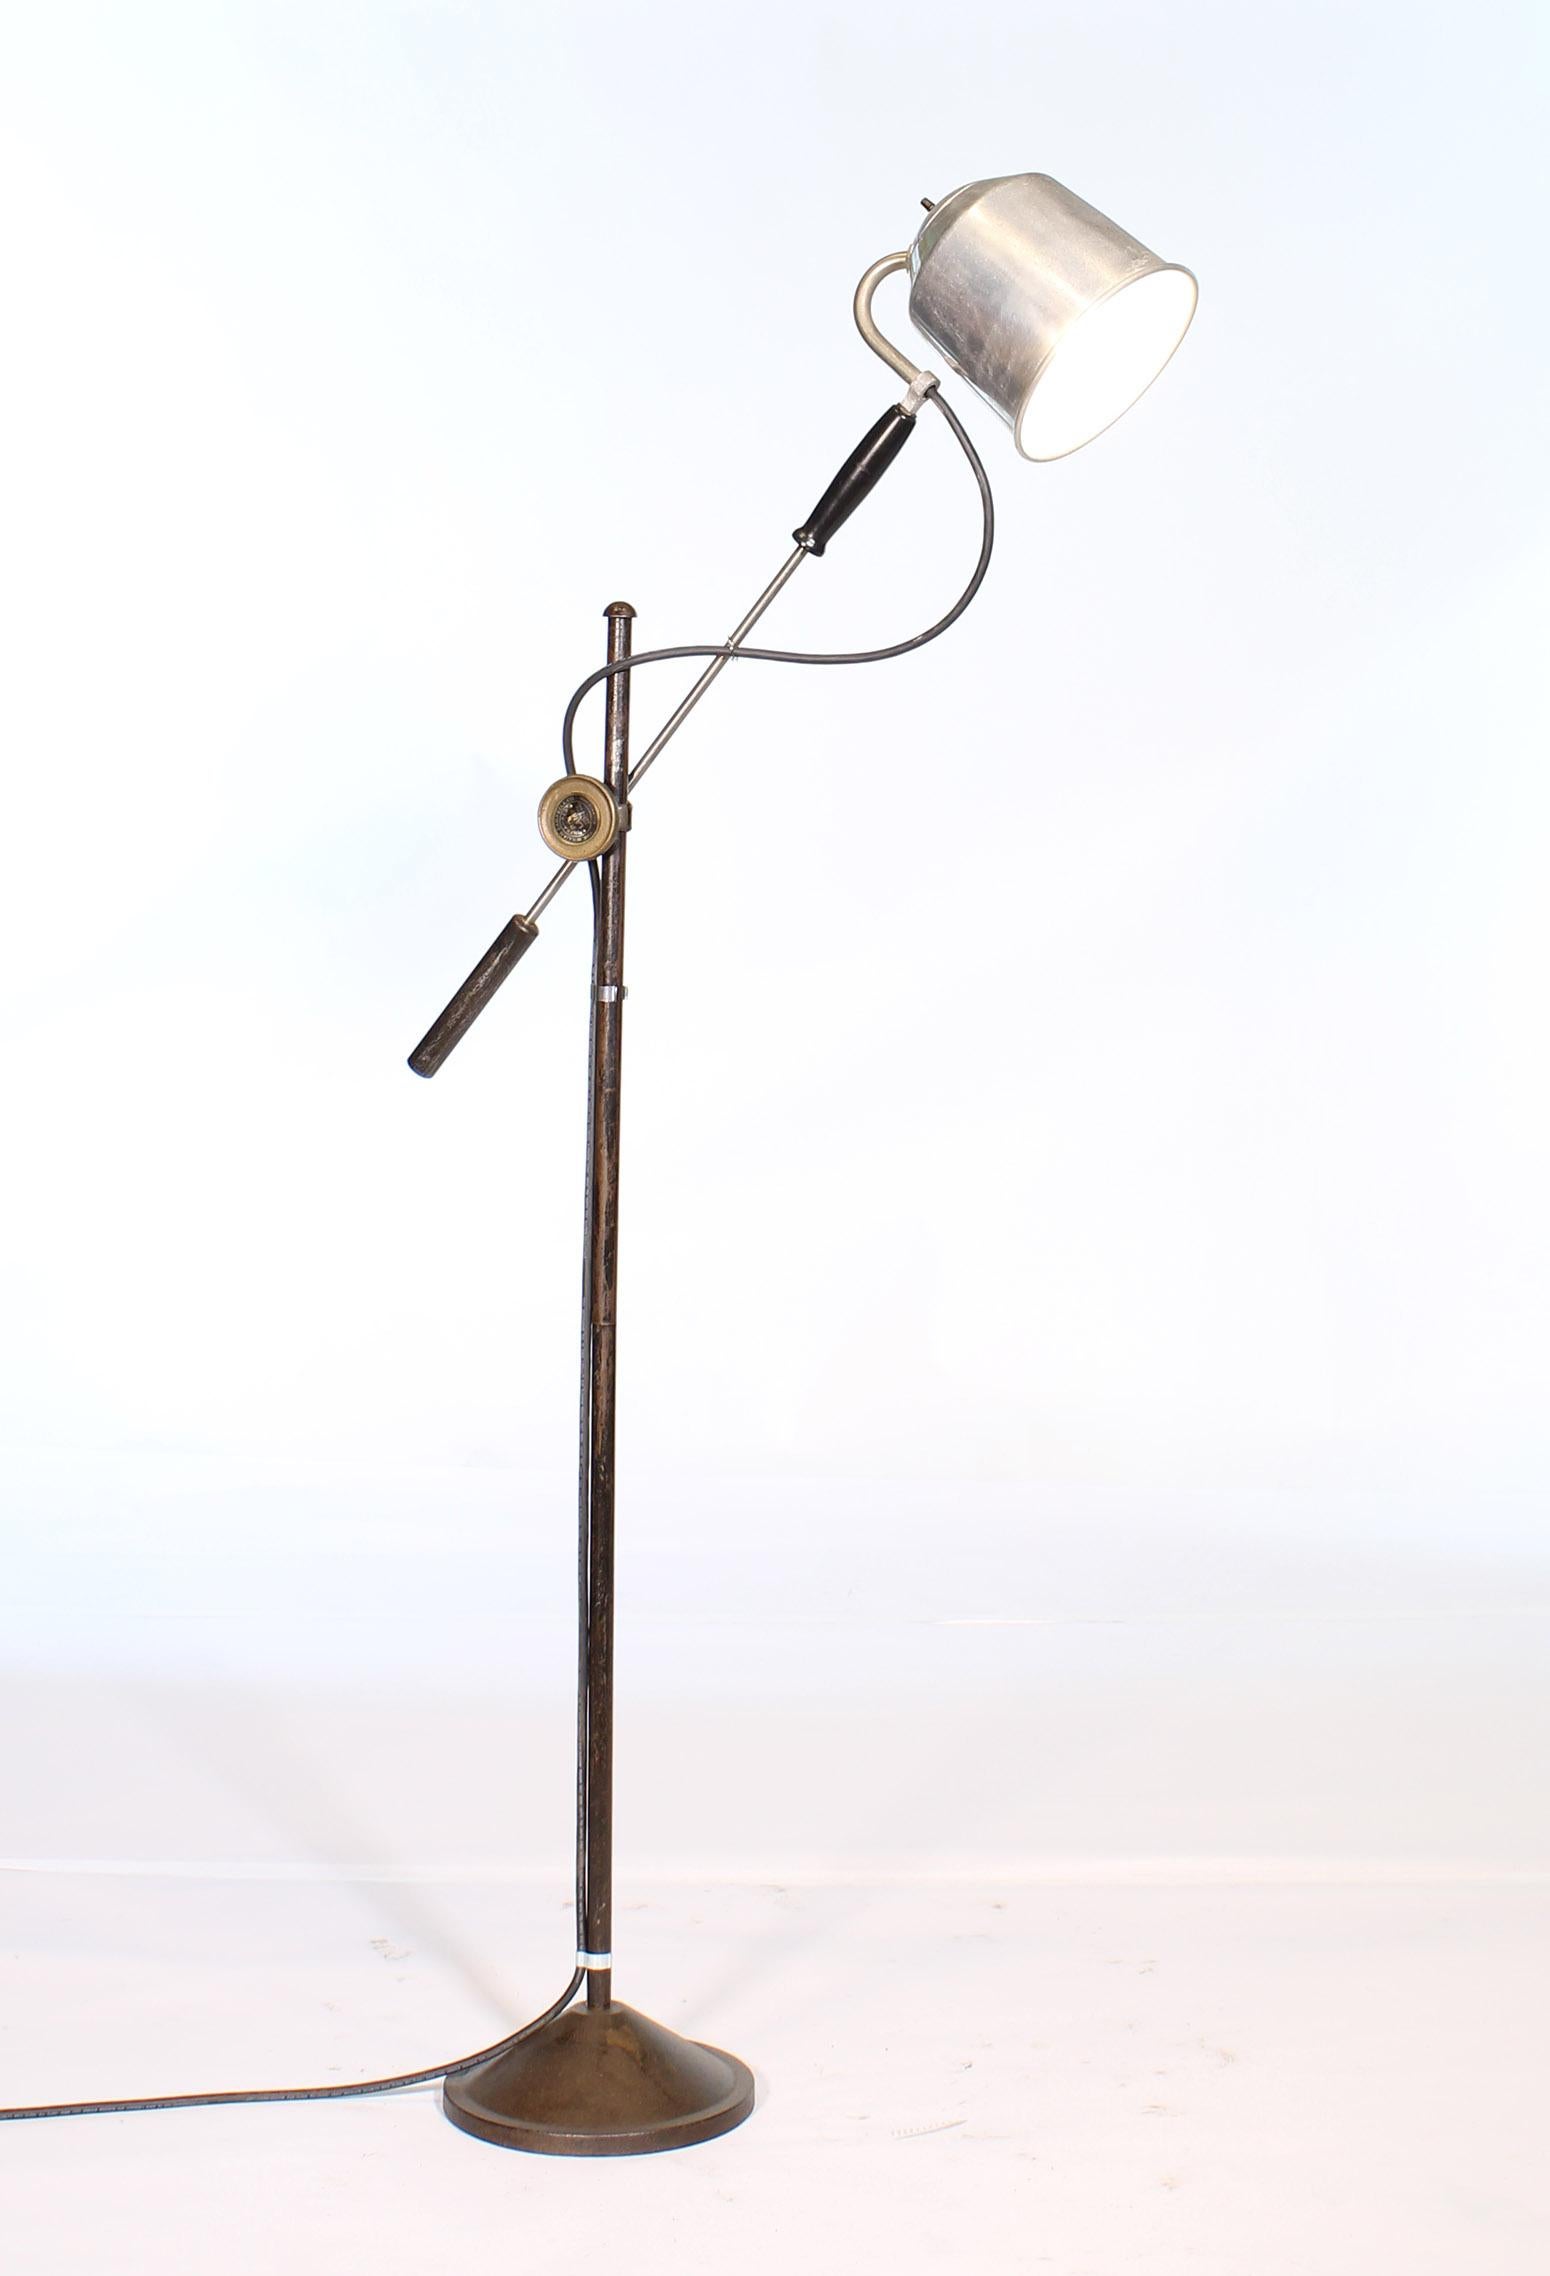 Authentic vintage industrial adjustable floor / reading light made by William Campbell Co. Features solid brass center adjustment fitting, aluminum shade, formed handle and iron base. The lower arm measures 42